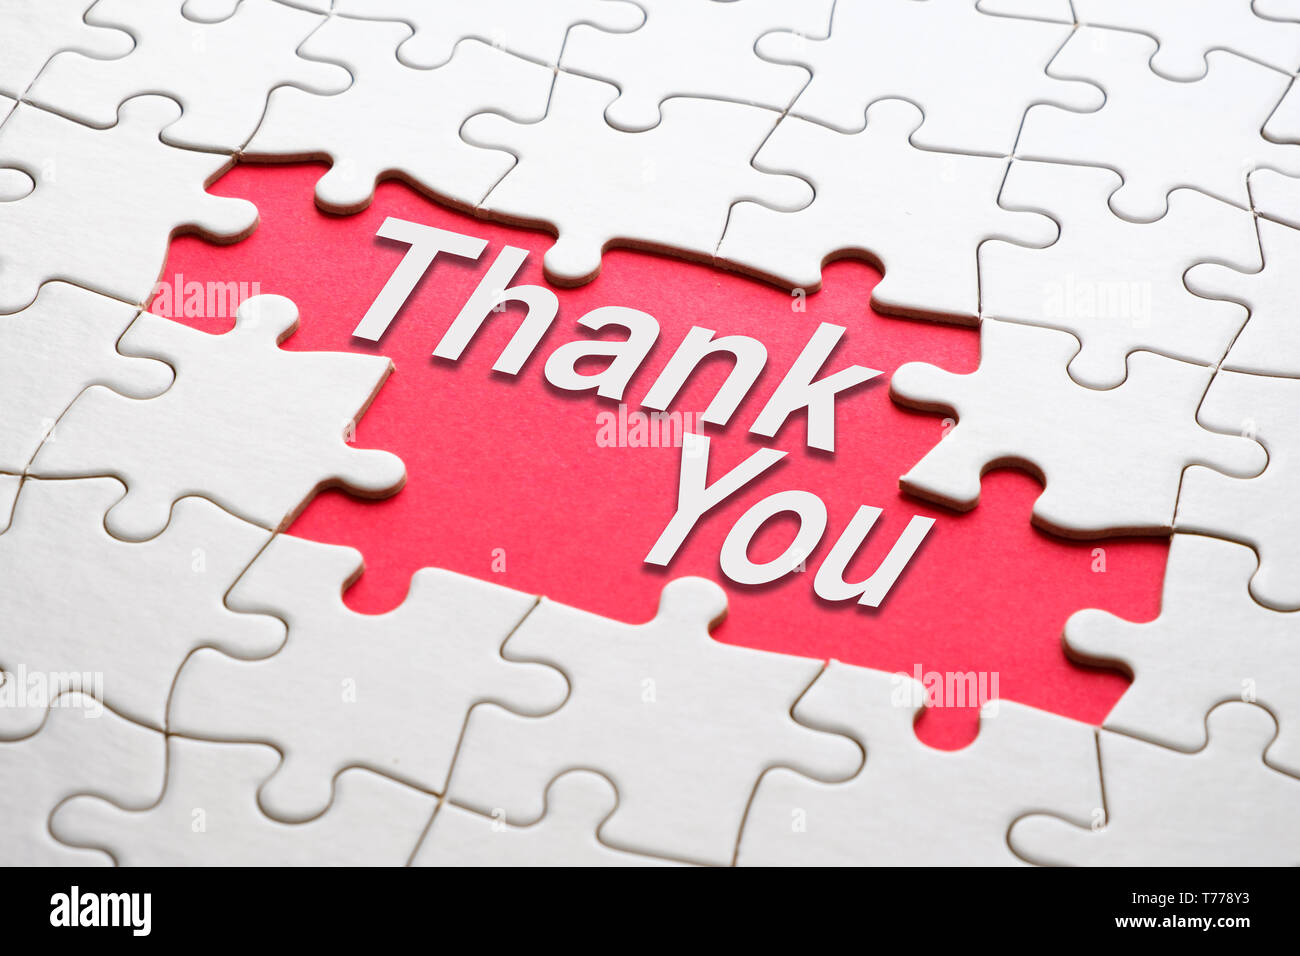 Thank you word reveal under jigsaw puzzle Stock Photo - Alamy